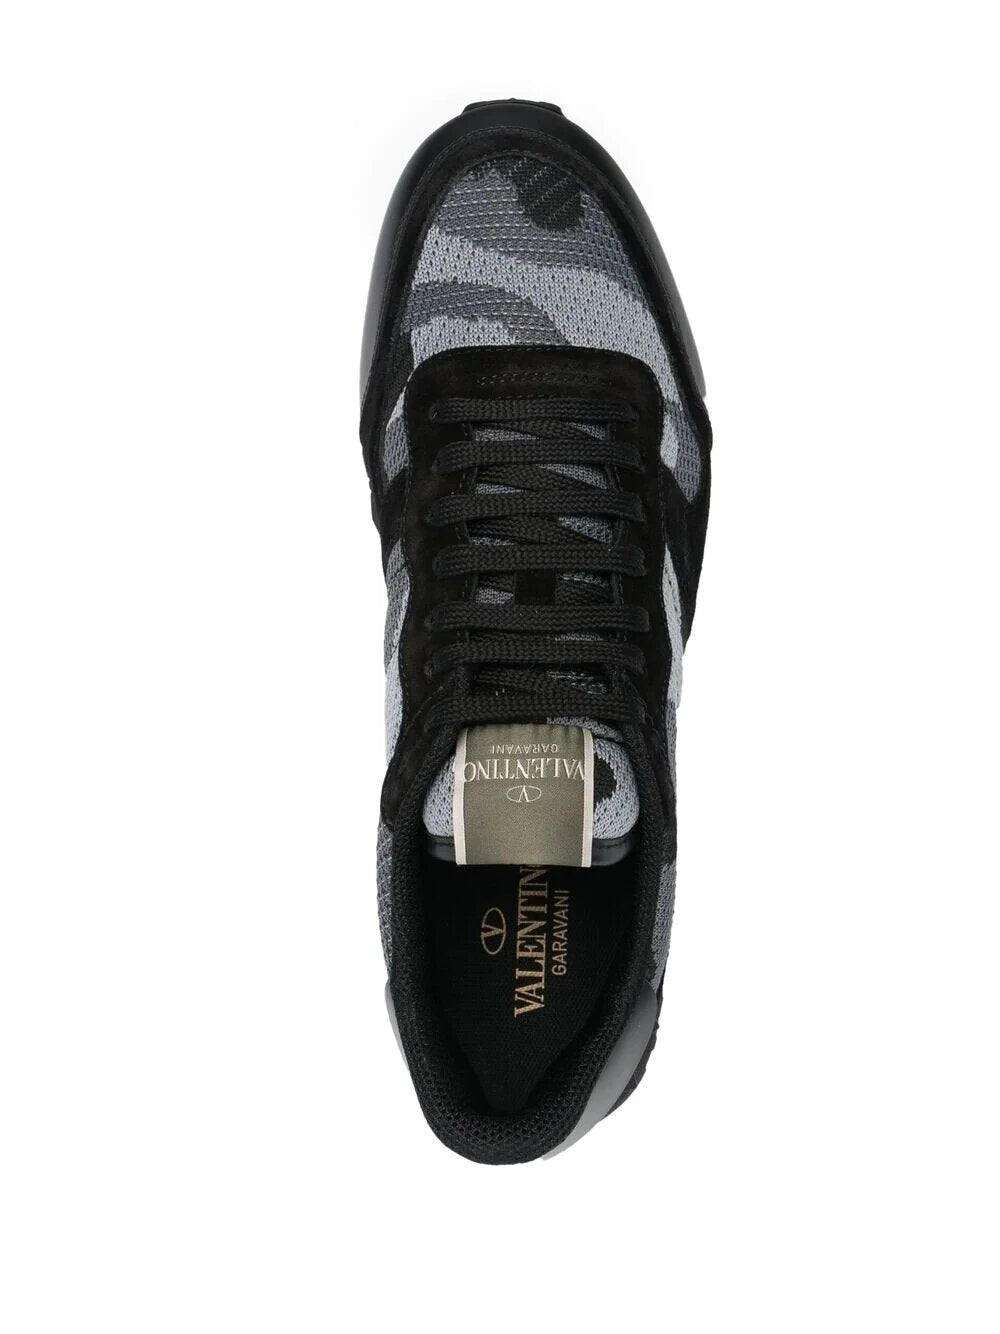 Valentino Mesh Camouflage Trainers in Black & Grey